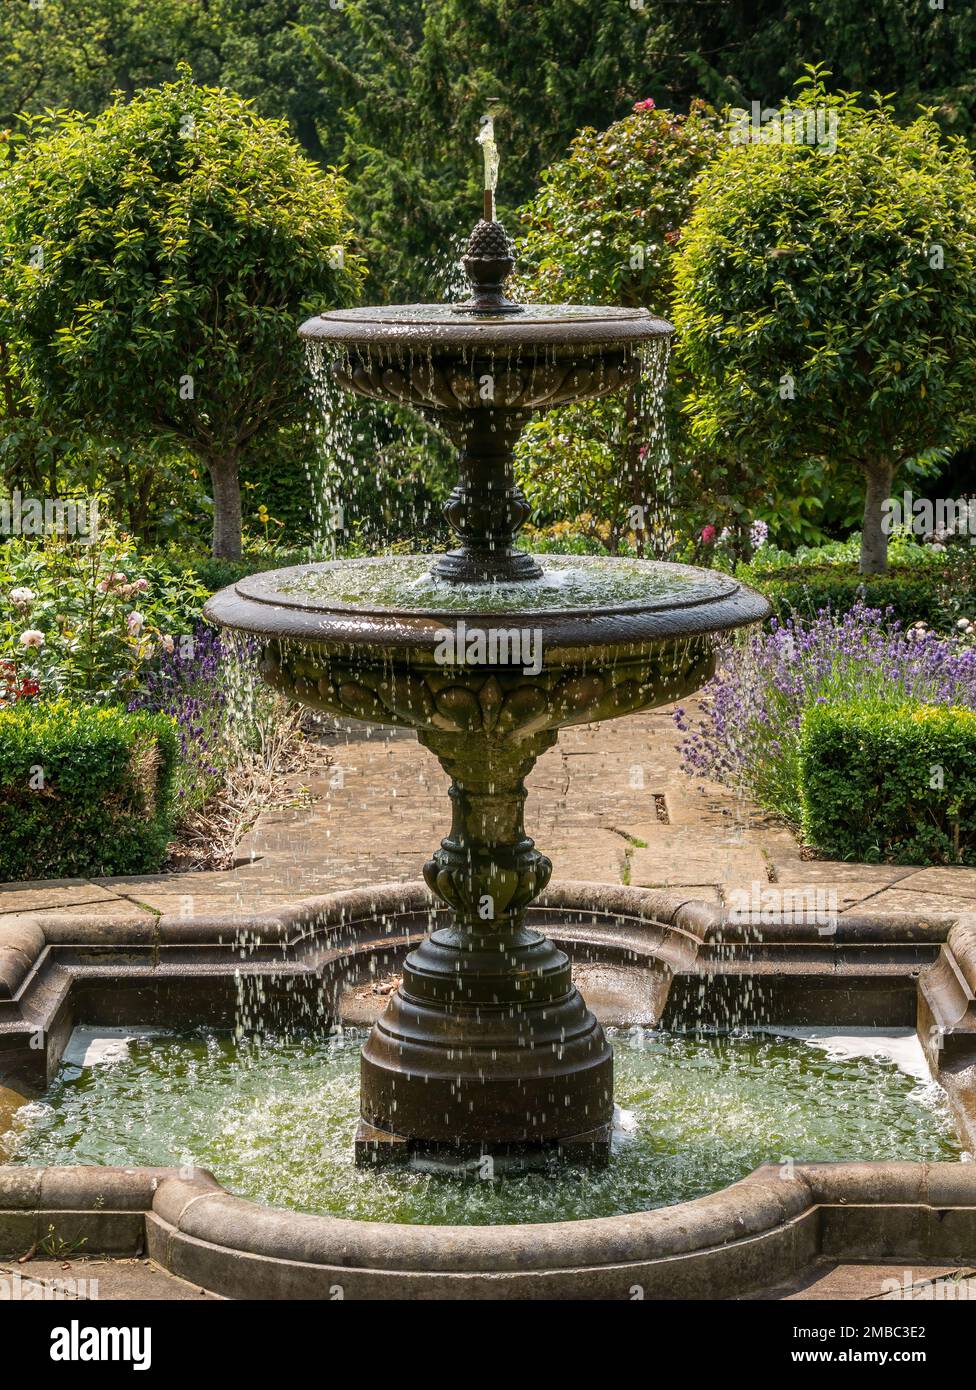 Tiered ornamental garden water fountain in the Rose Garden at Belvoir Castle, Leicestershire, England, UK Stock Photo